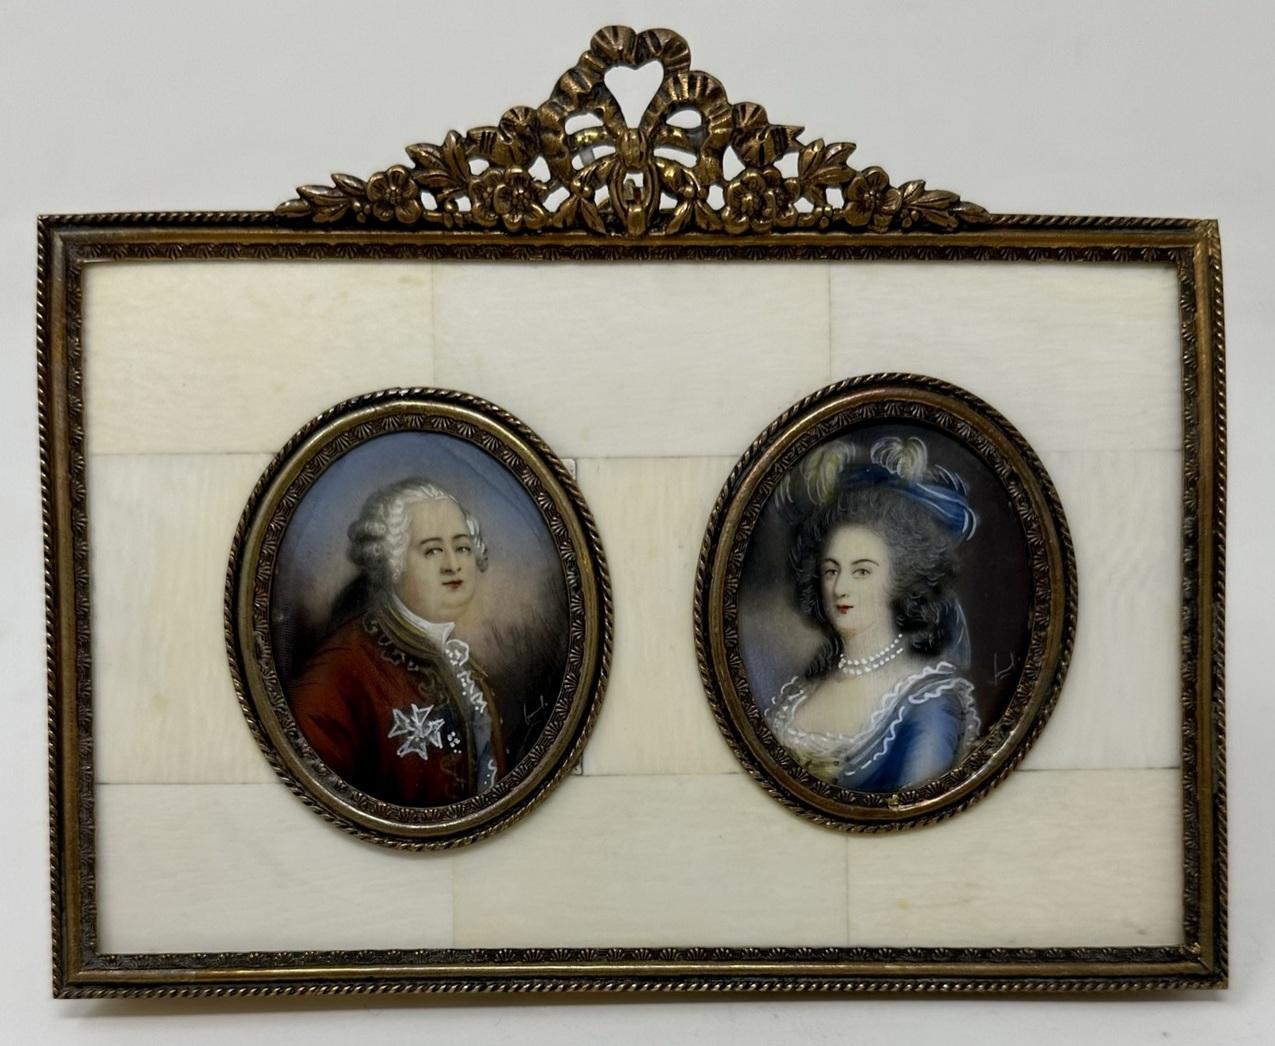 Stunning example of a pair of oil on card Paintings depicting Napoleon and Josephine in oval form within a gilt frame and under cushioned glass, on an ivorine ground complete with original ormolu frame, last half of the Nineteenth Century.  

The